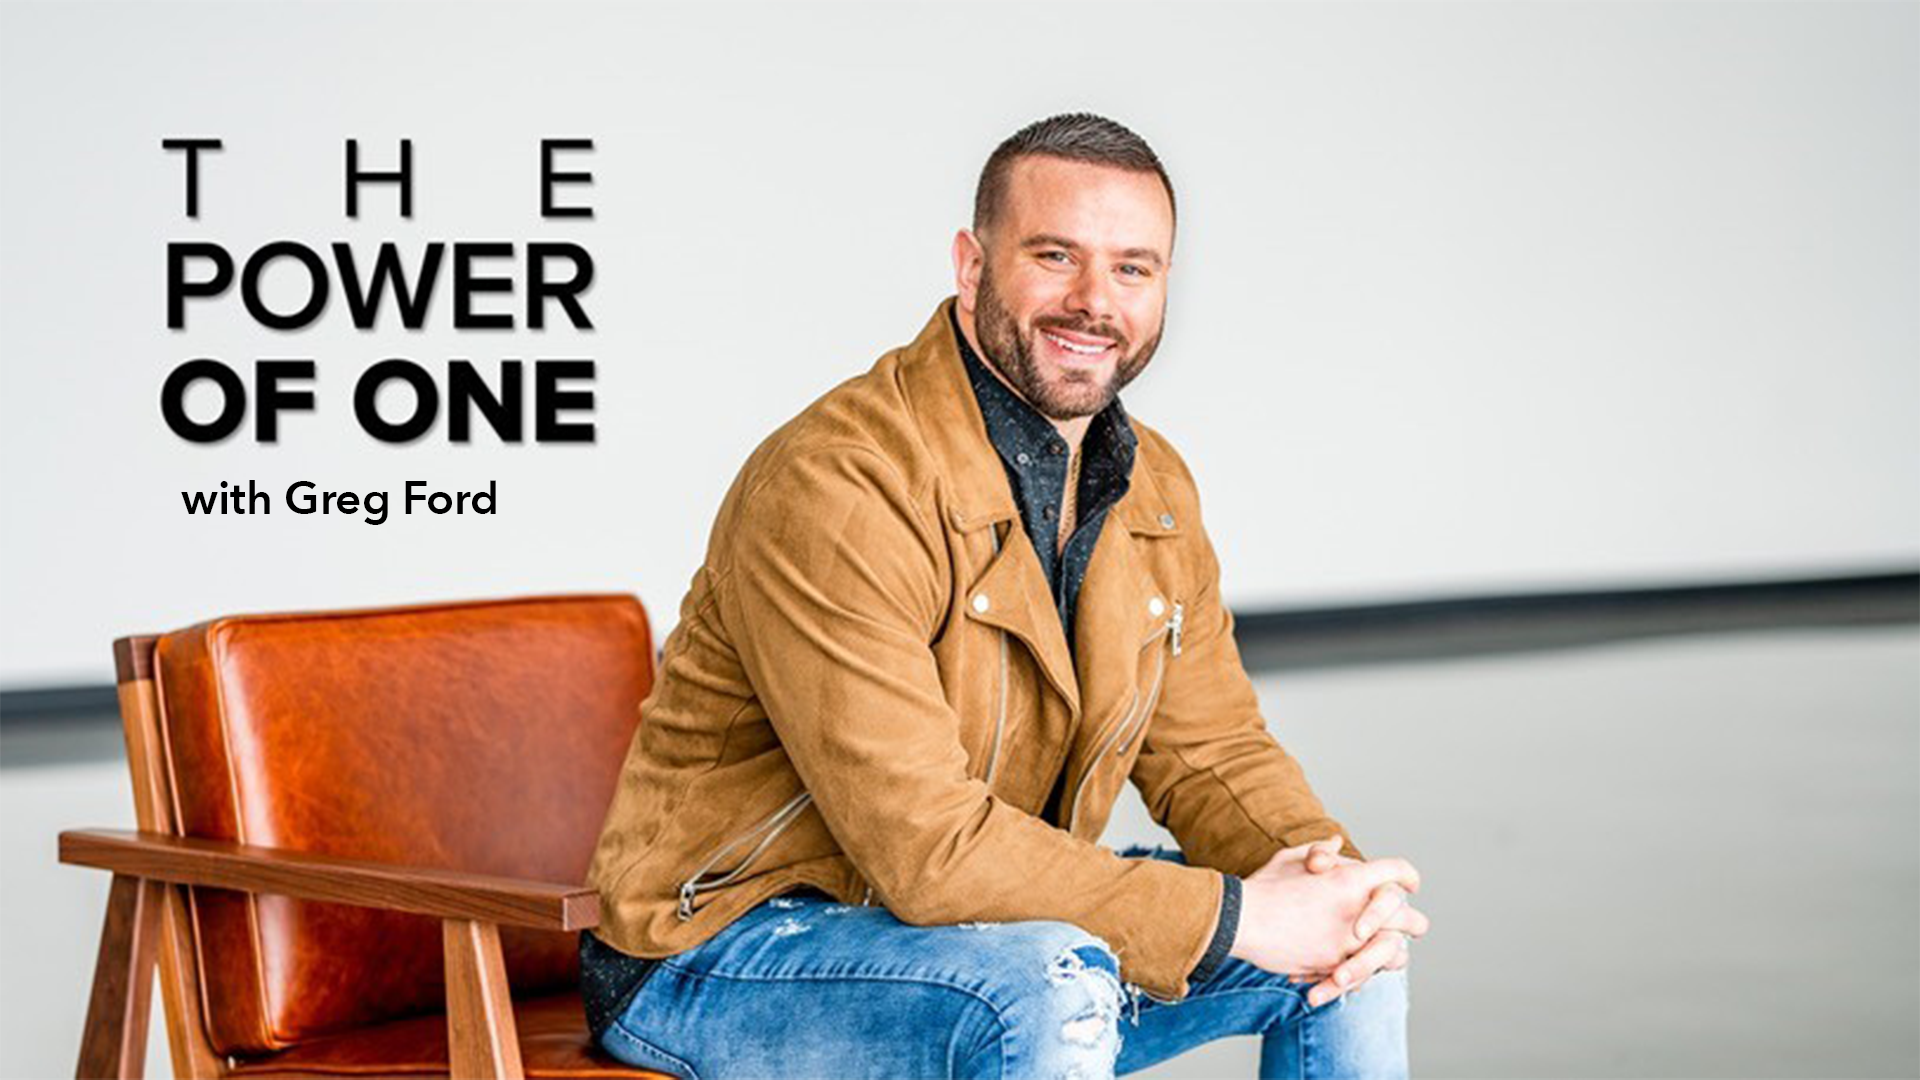 The Power of One with Greg Ford